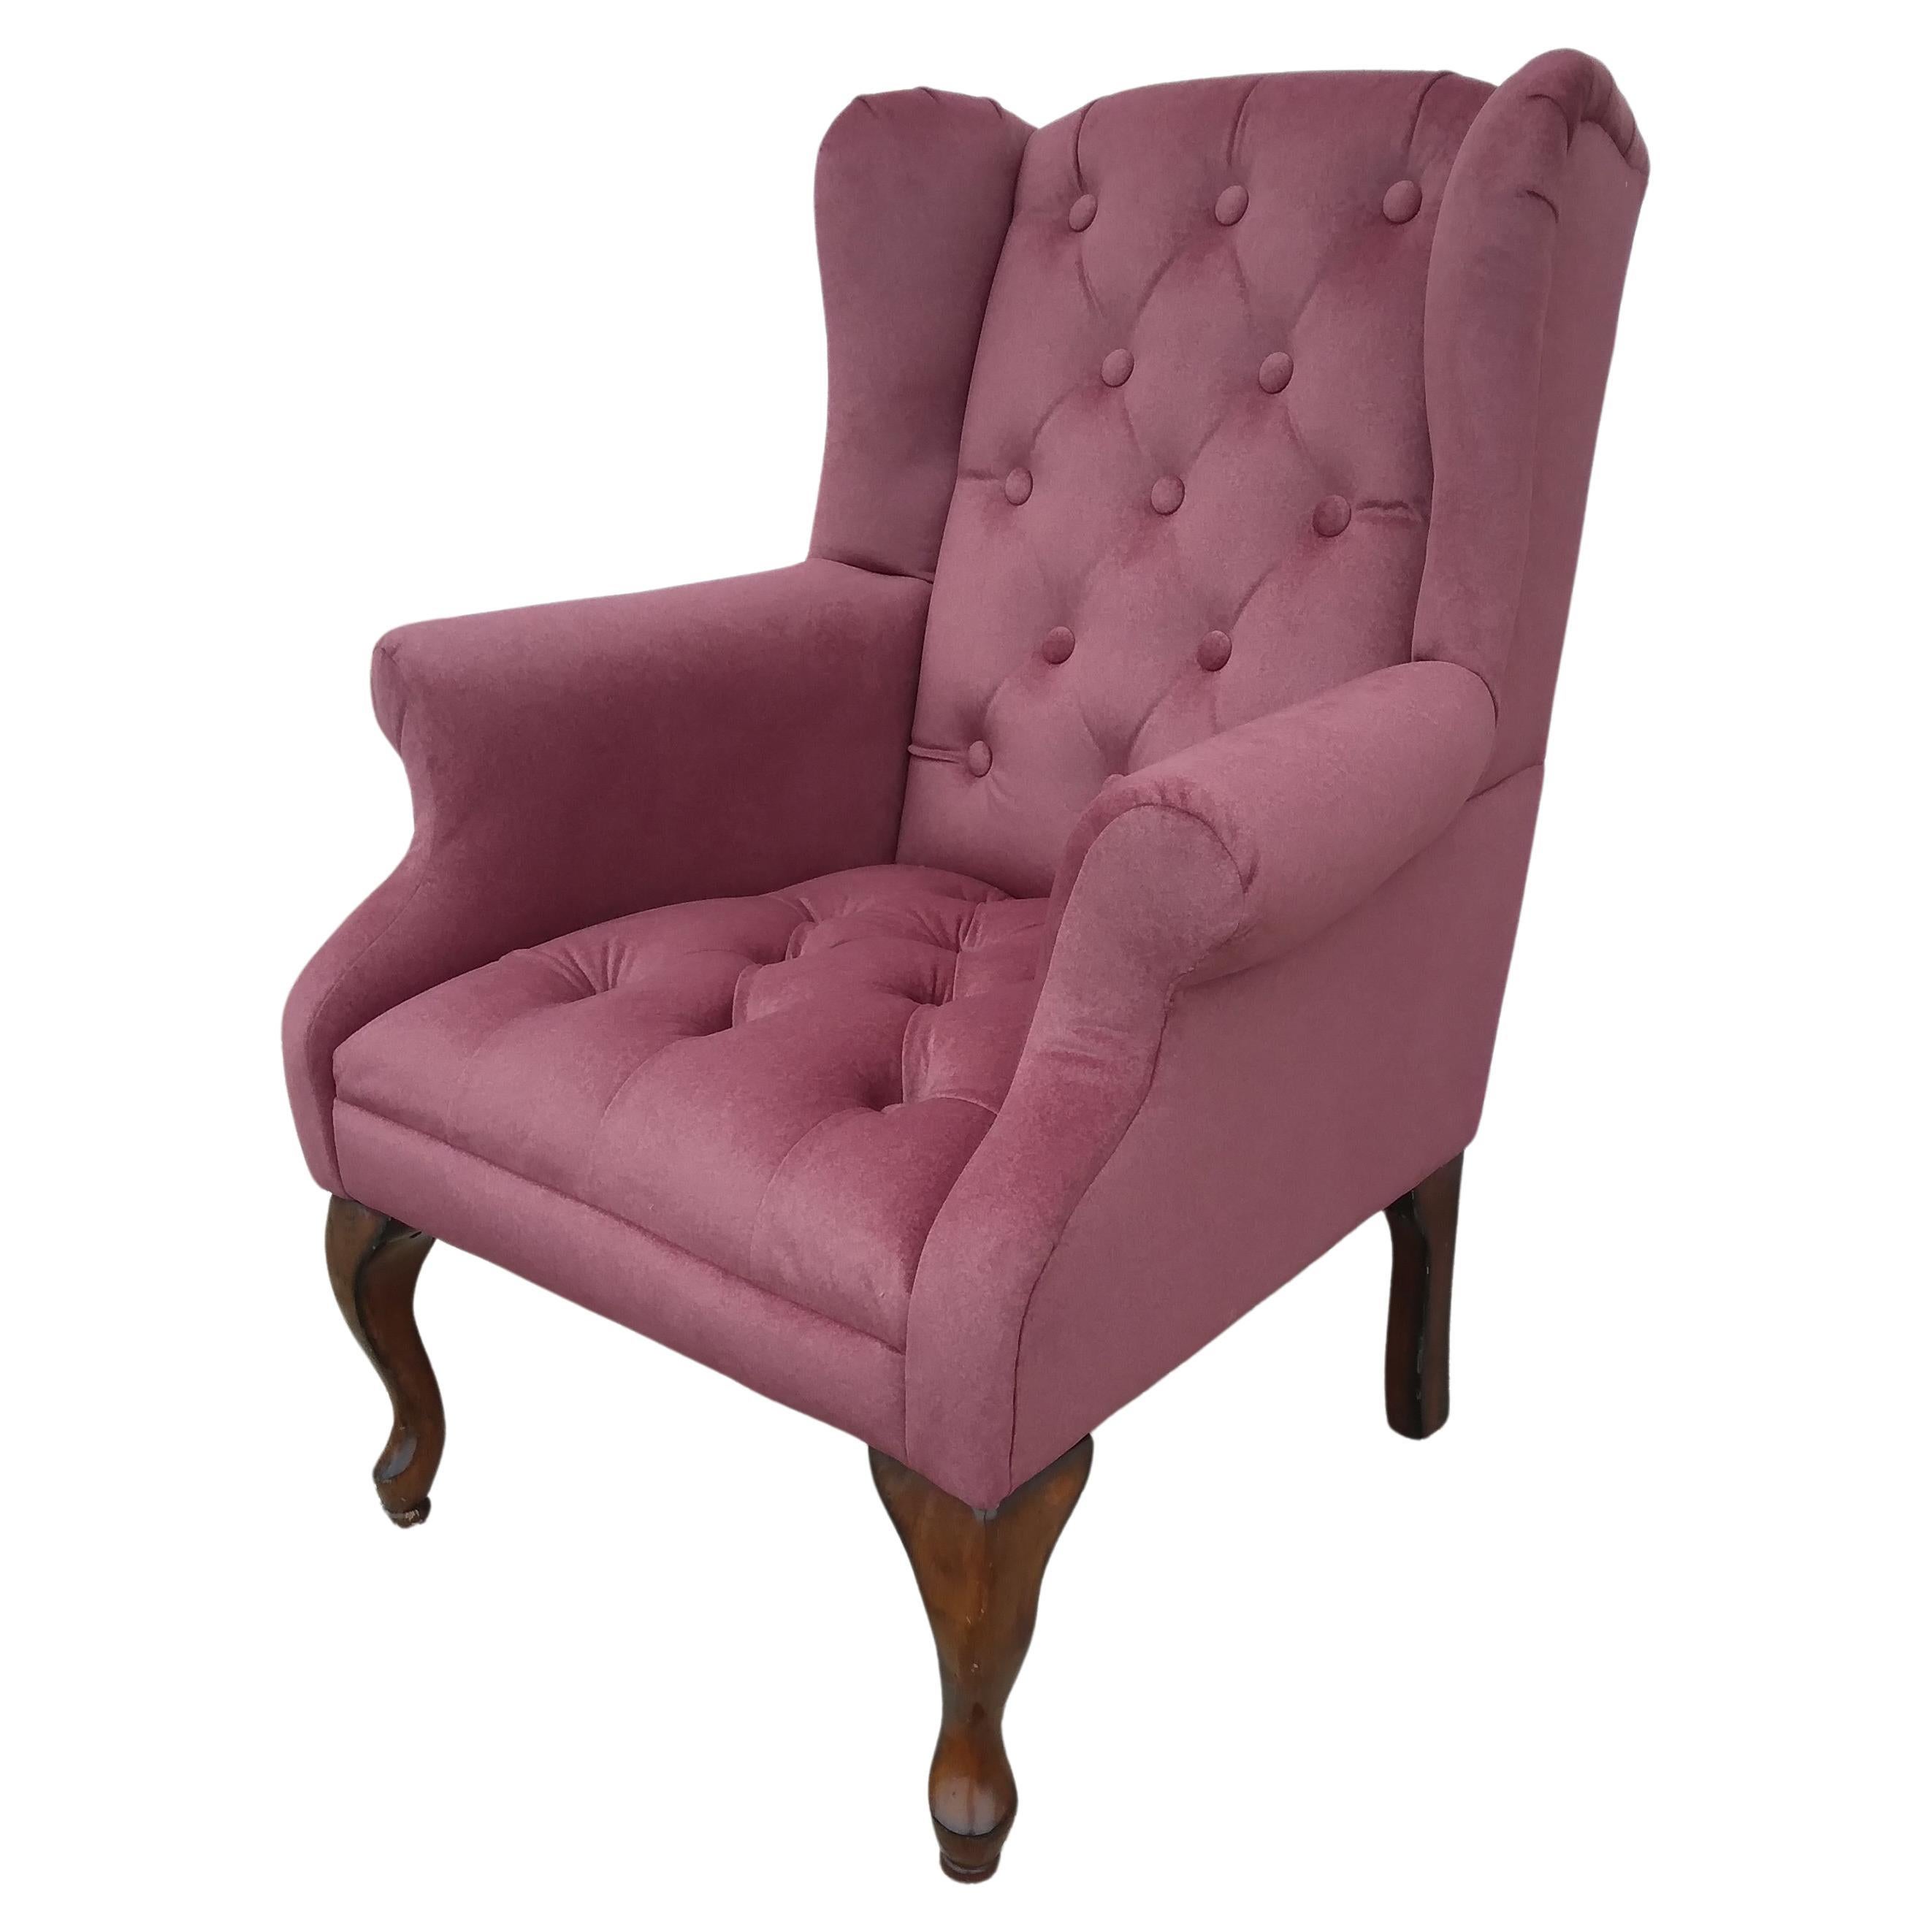 Vintage Tufted Wingback Chair aus rosa Chenille